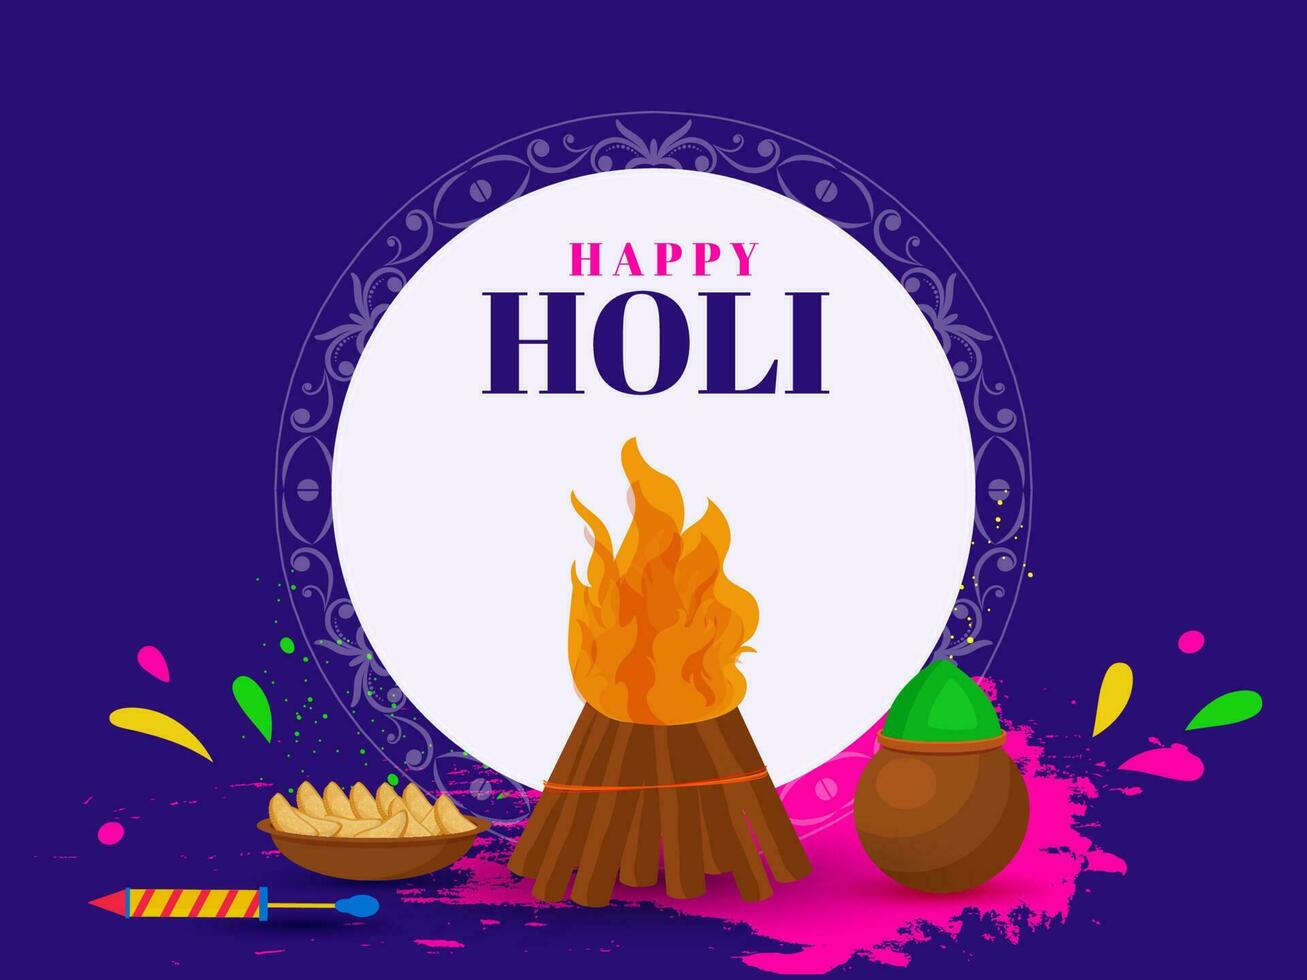 Happy Holi Celebration Concept With Bonfire, Mud Pot Full Of Powder, Water Gun, Indian Sweet On White And Purple Background. vector